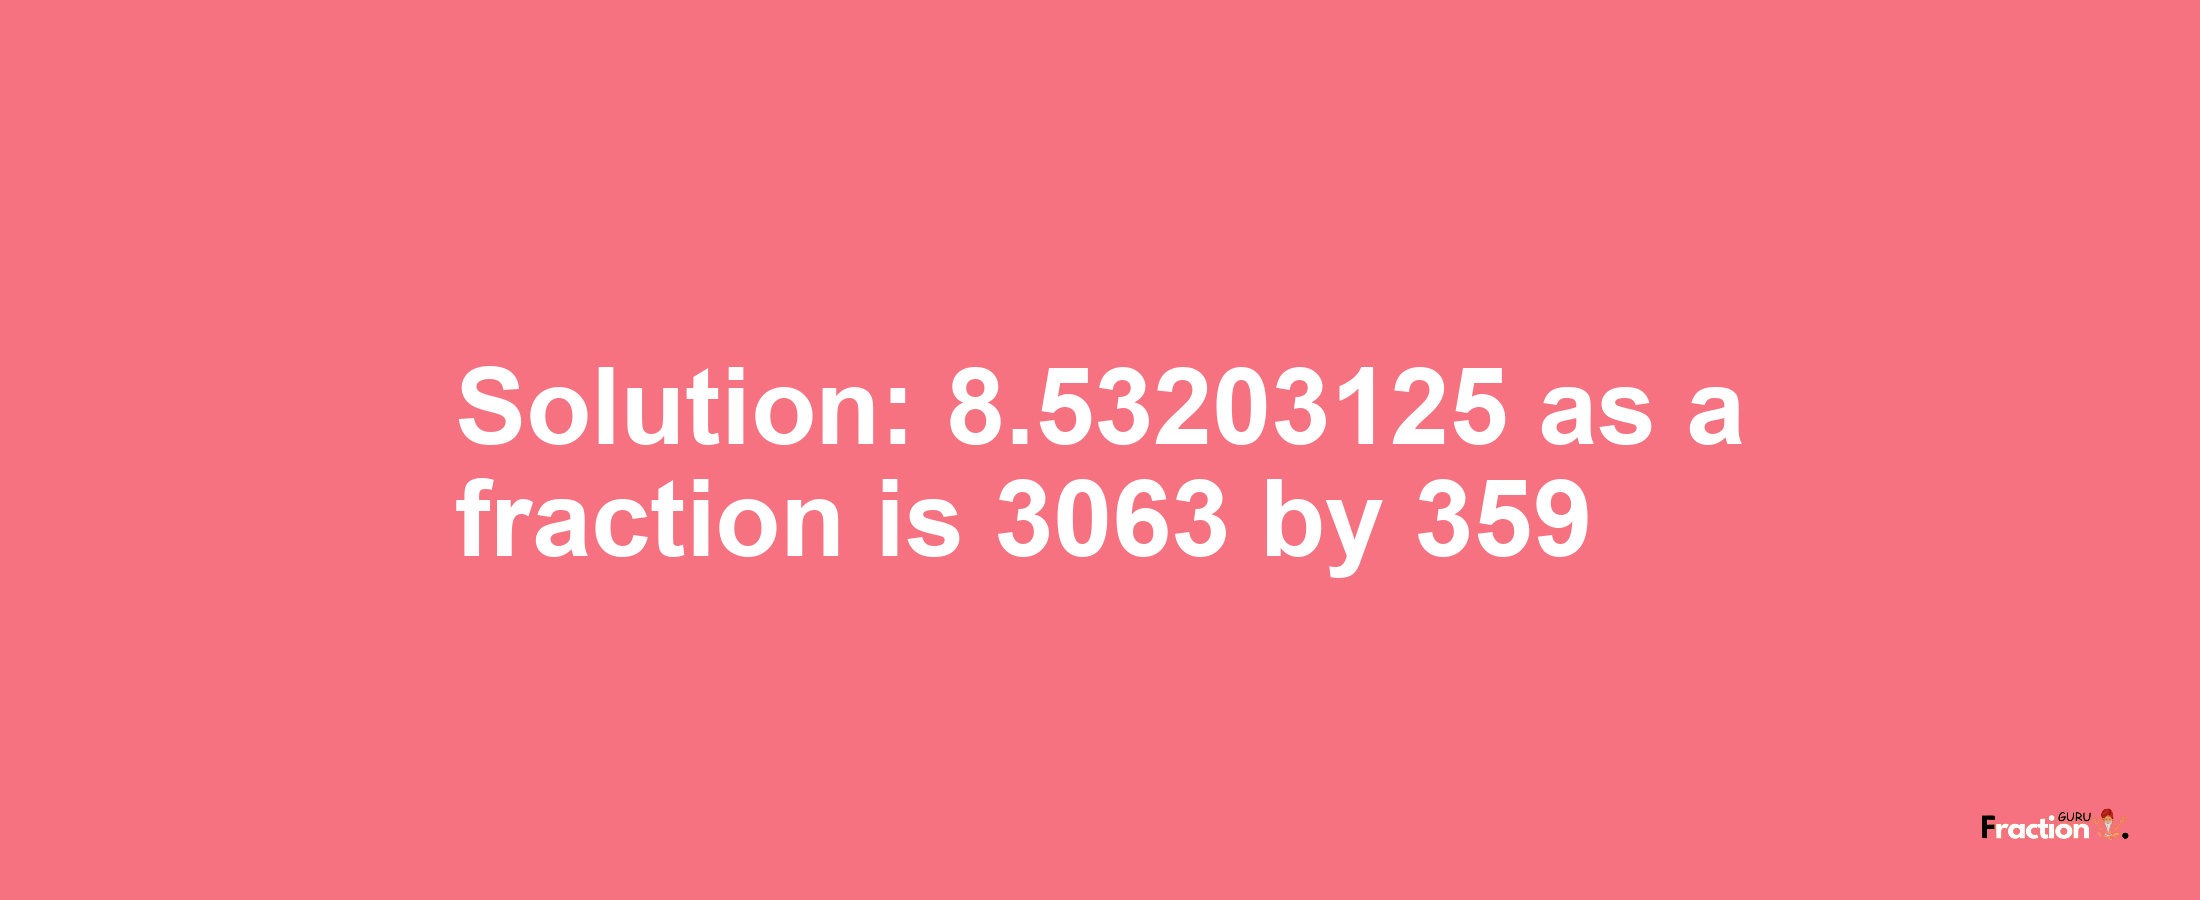 Solution:8.53203125 as a fraction is 3063/359